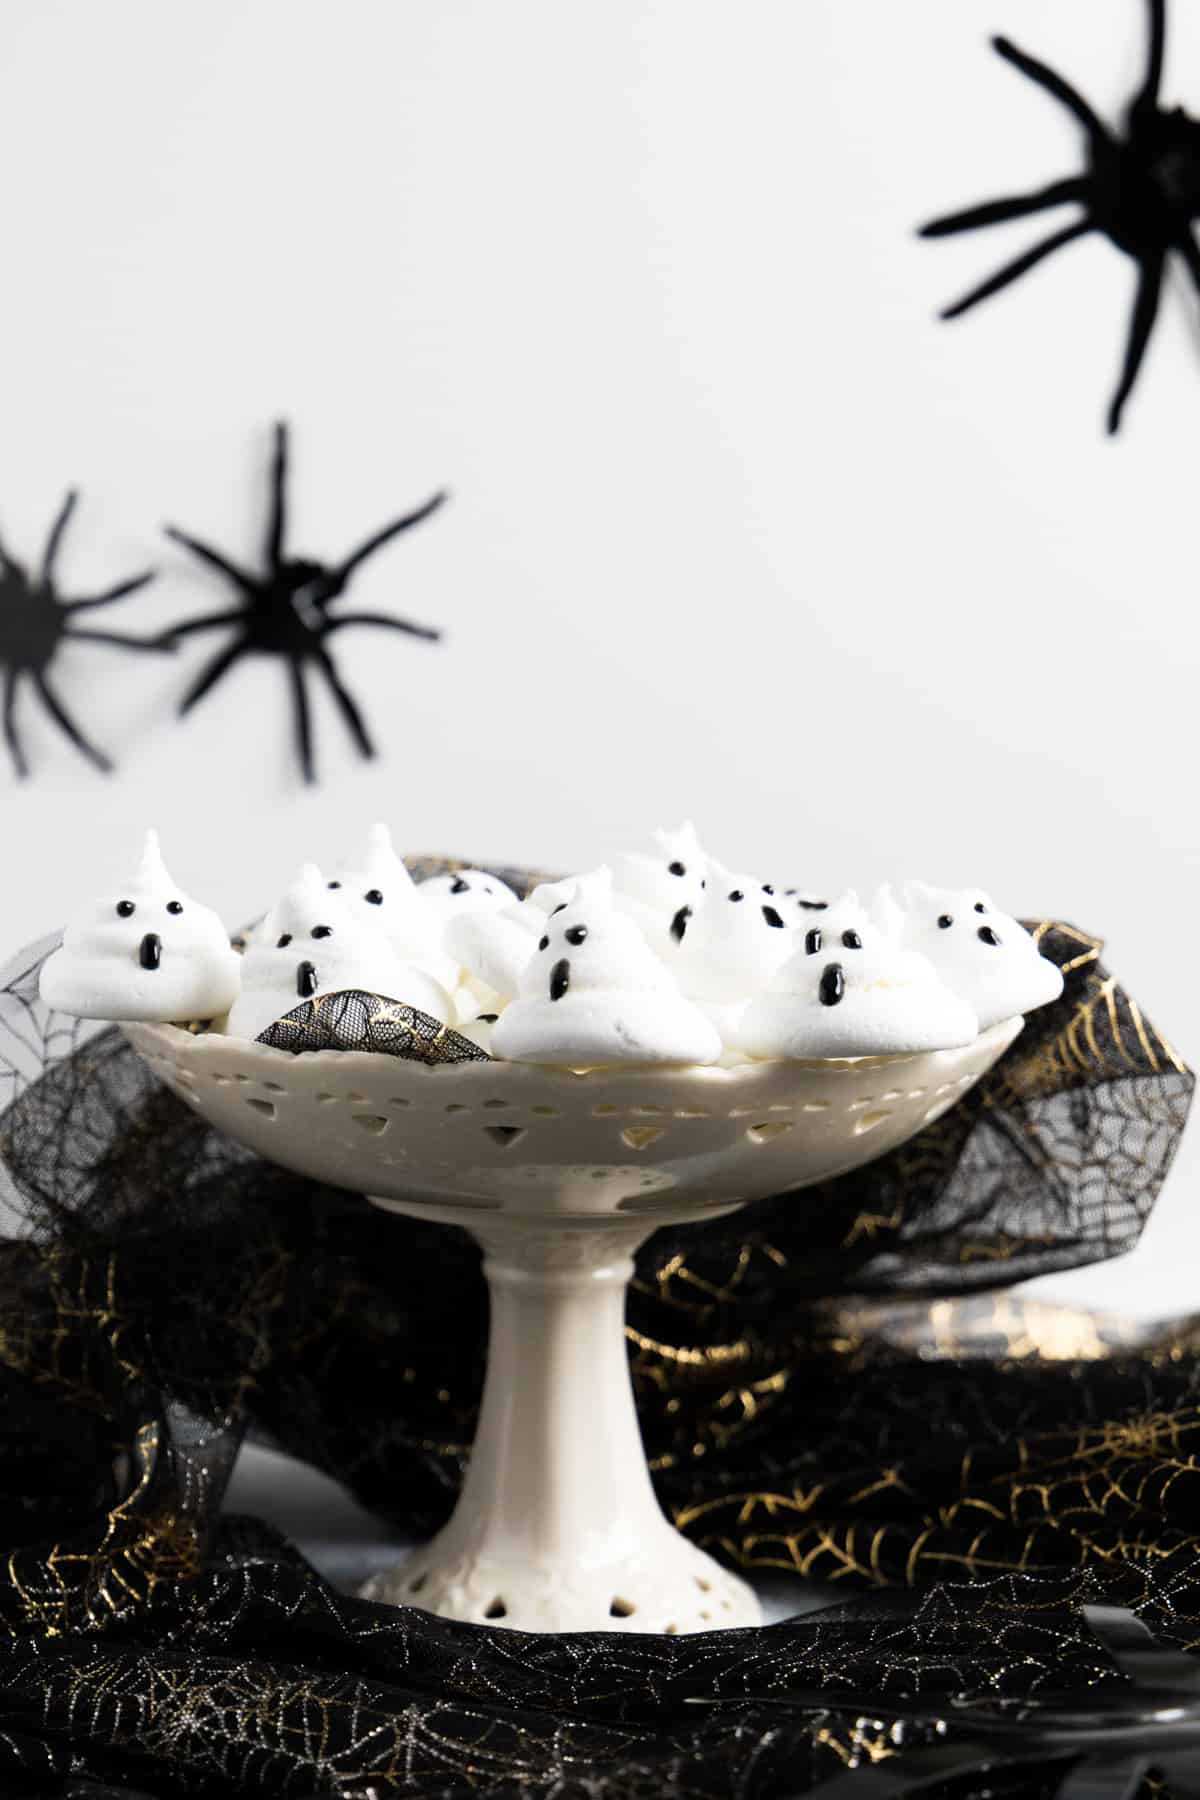 Side view of a cake stand with ghost meringues on it and fake spiders in the background